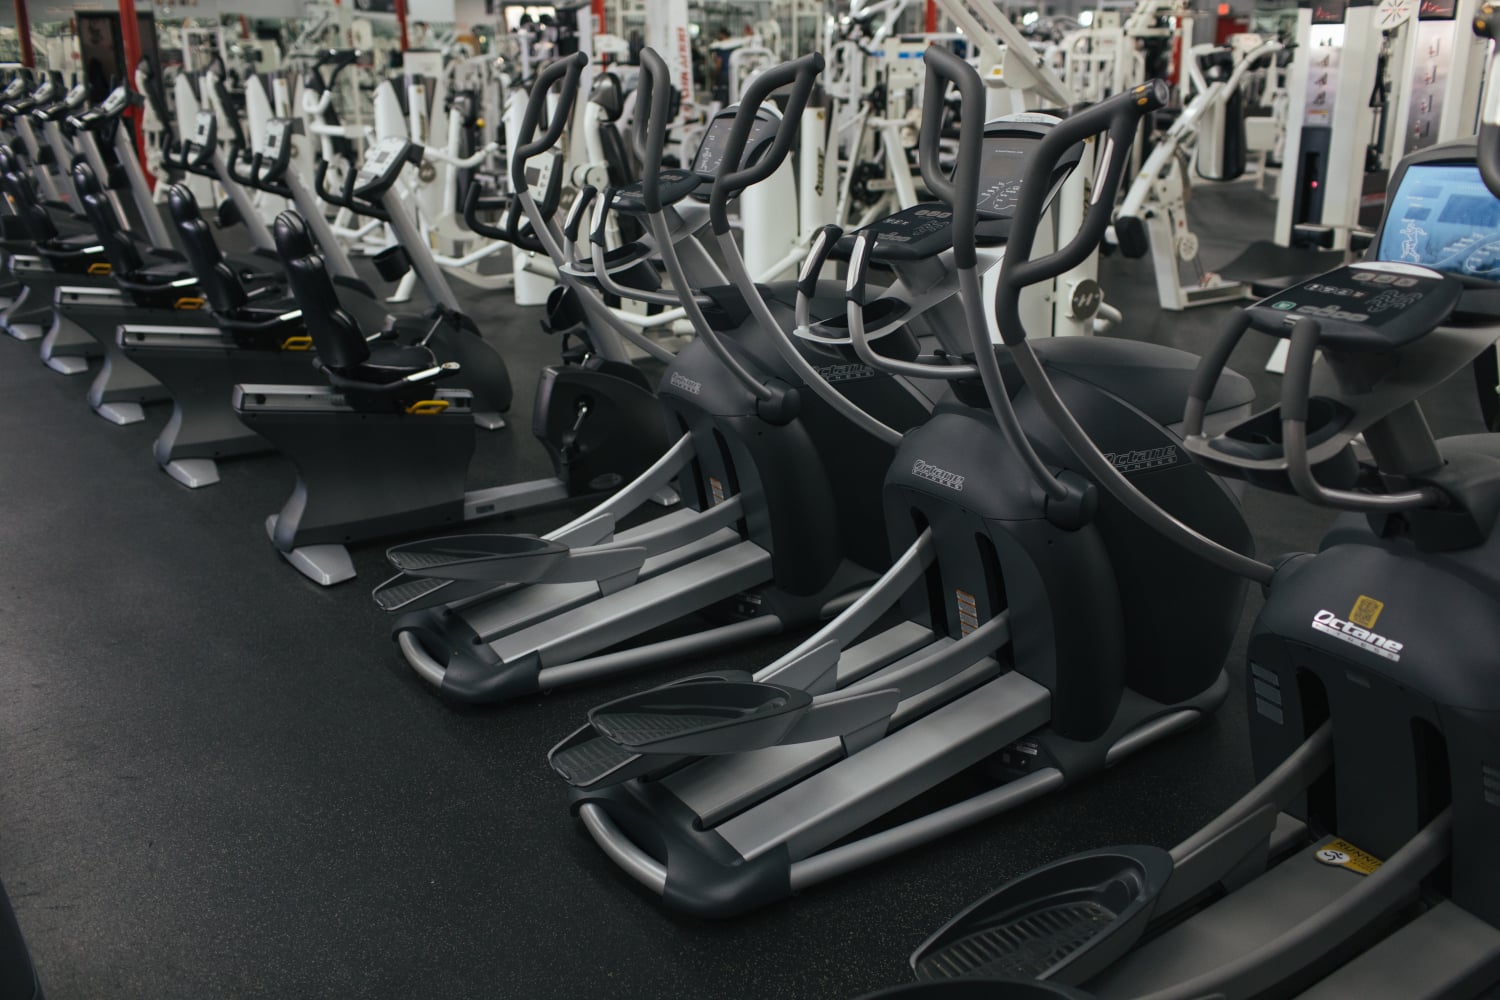 Elliptical VS StairMaster Which is Best Machine for Home Gym - idlGYM